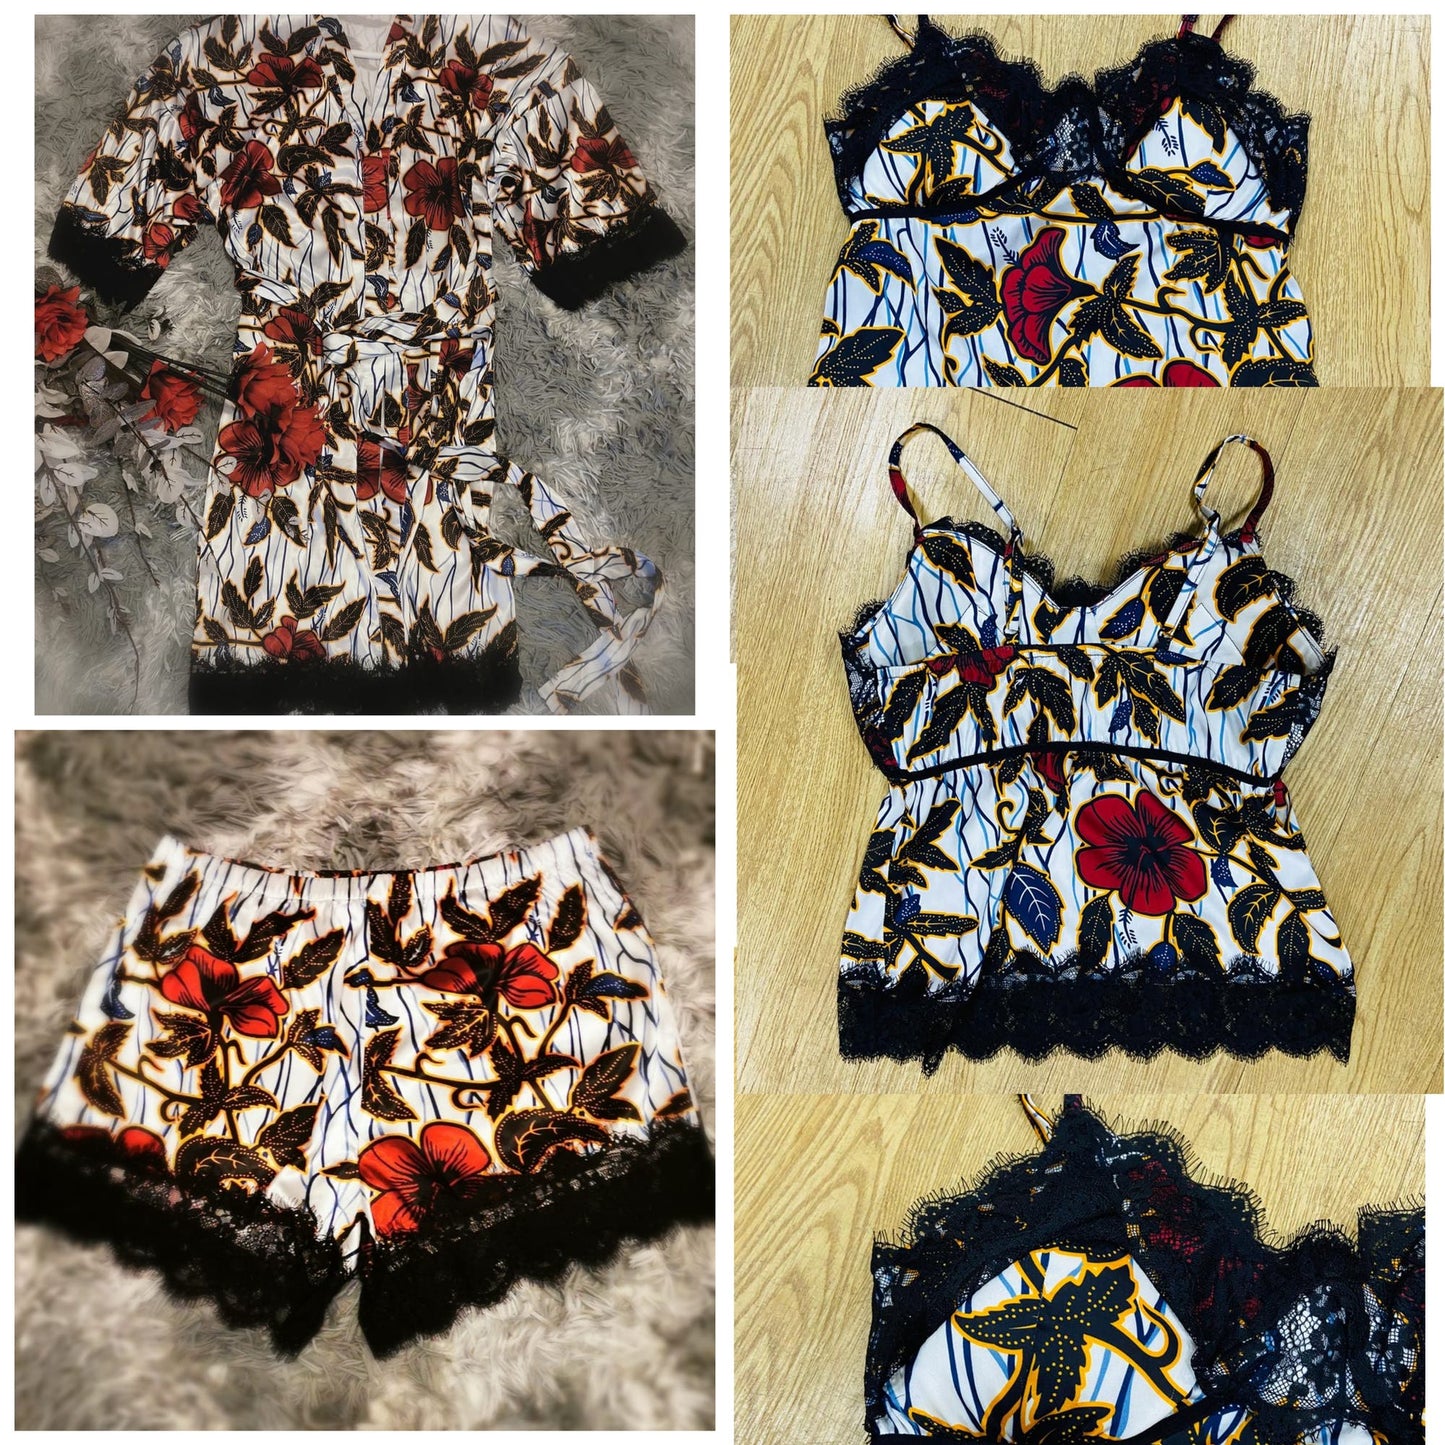 Satin shorts pyjama set in black white and red African inspired print by Lohi